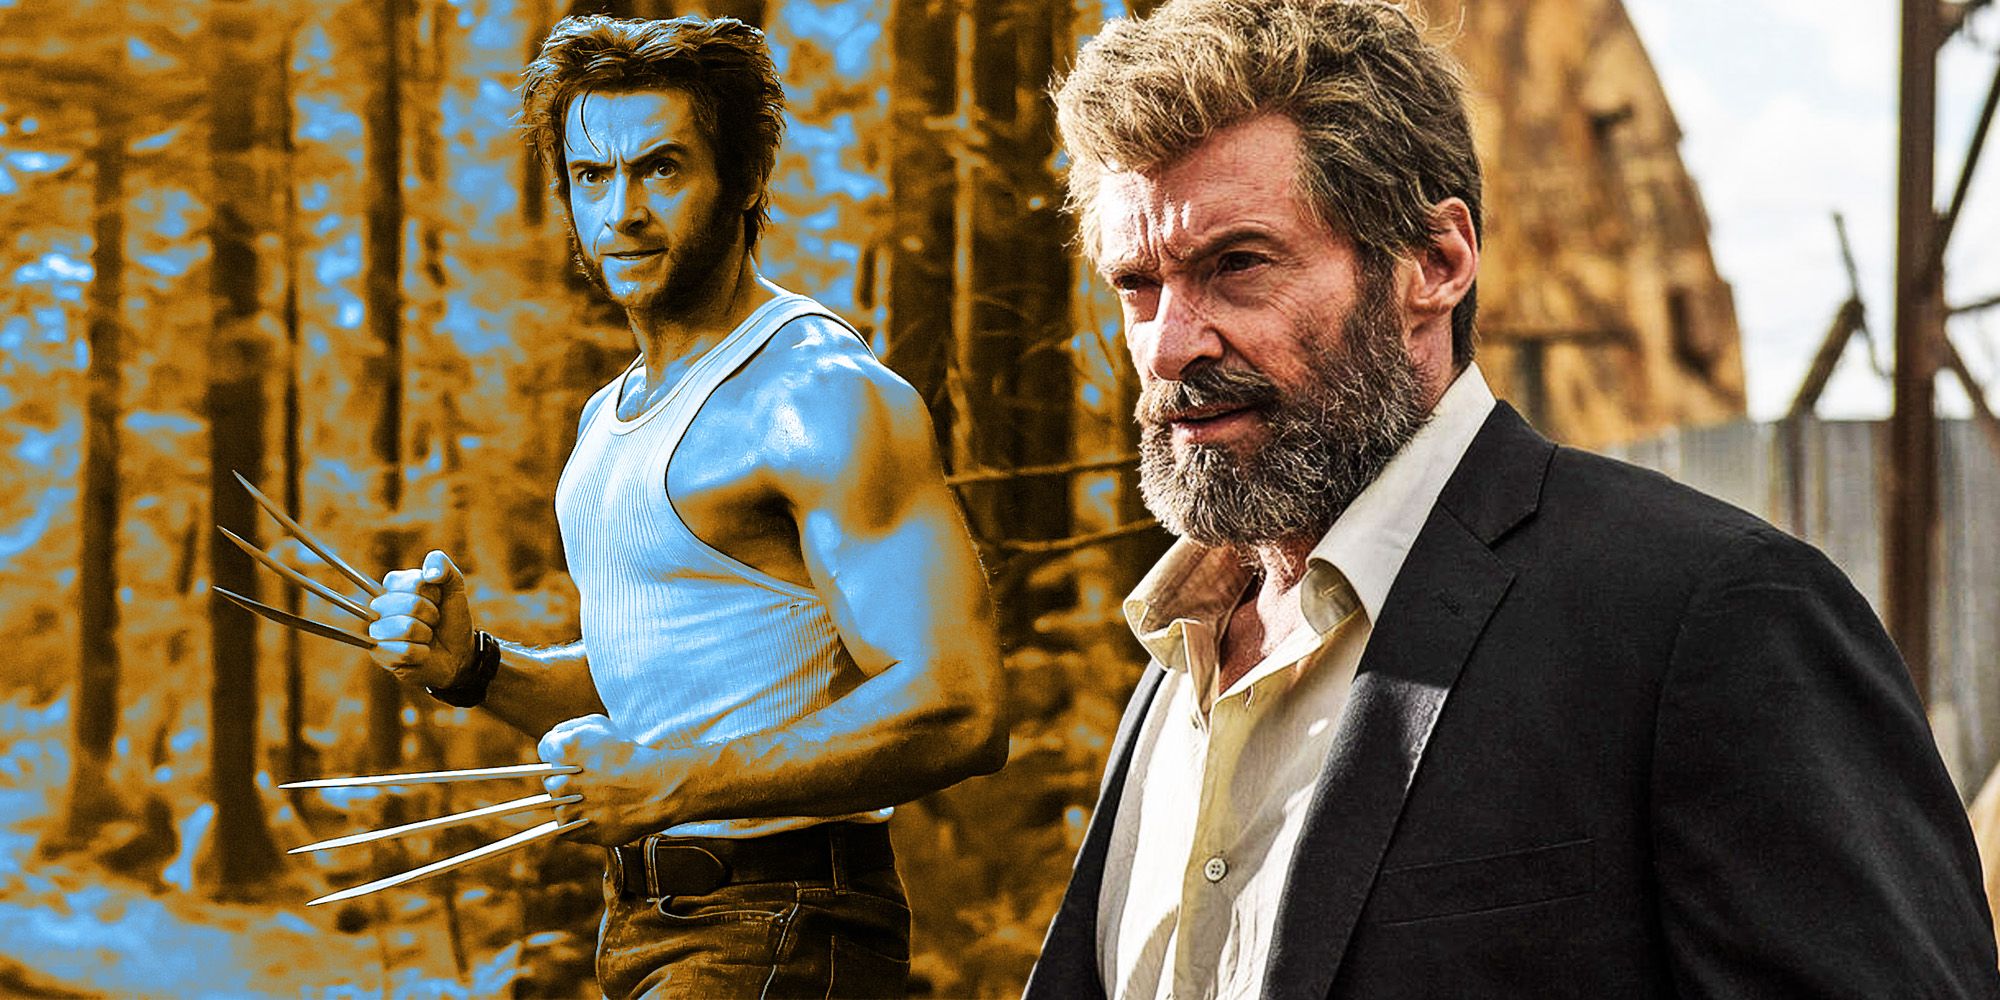 Blended image of Hugh Jackman as Wolverine in X-Men The Last Stand and Logan